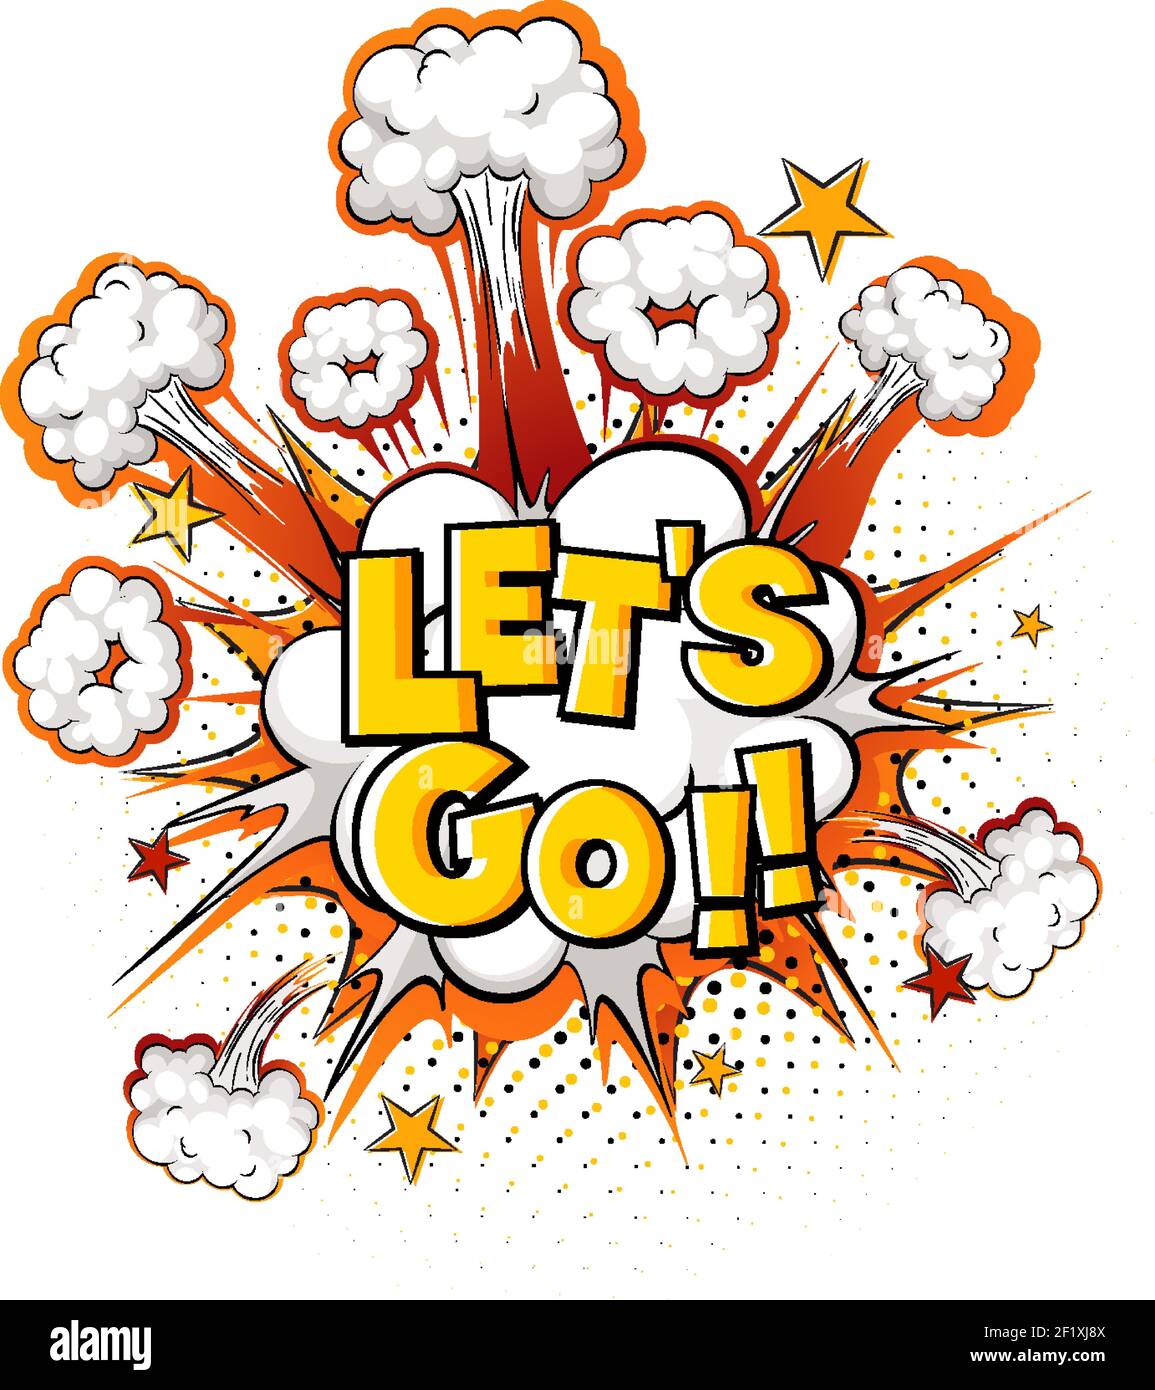 Comic speech bubble with let's go text illustration Stock Vector Image ...